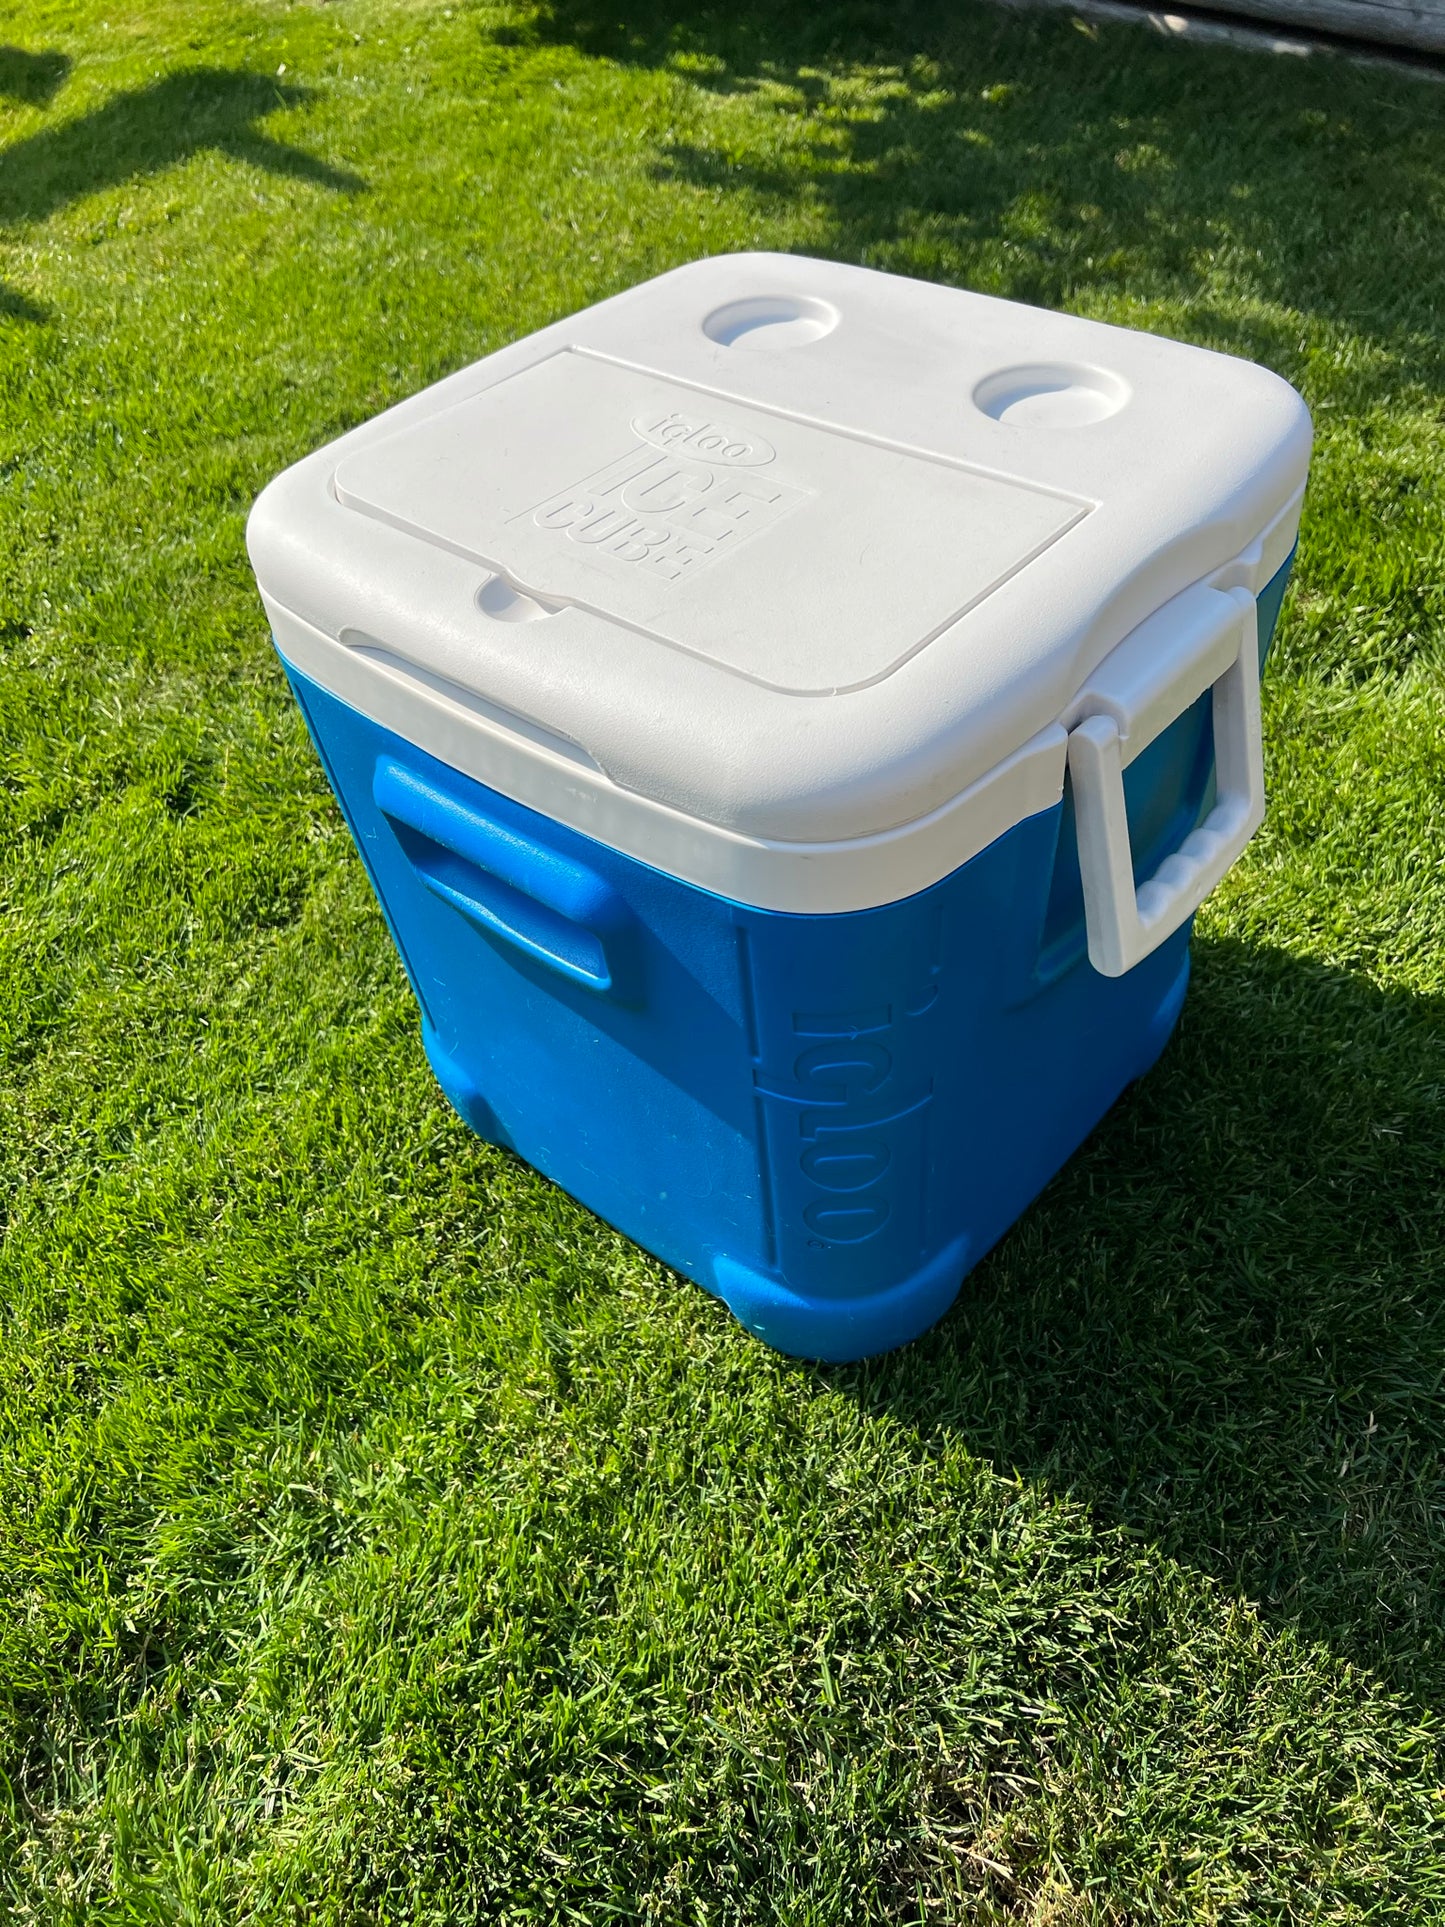 Camping Cooler Igloo Ice Cube With Small Pocket On Top Lid 14 Quart Like New